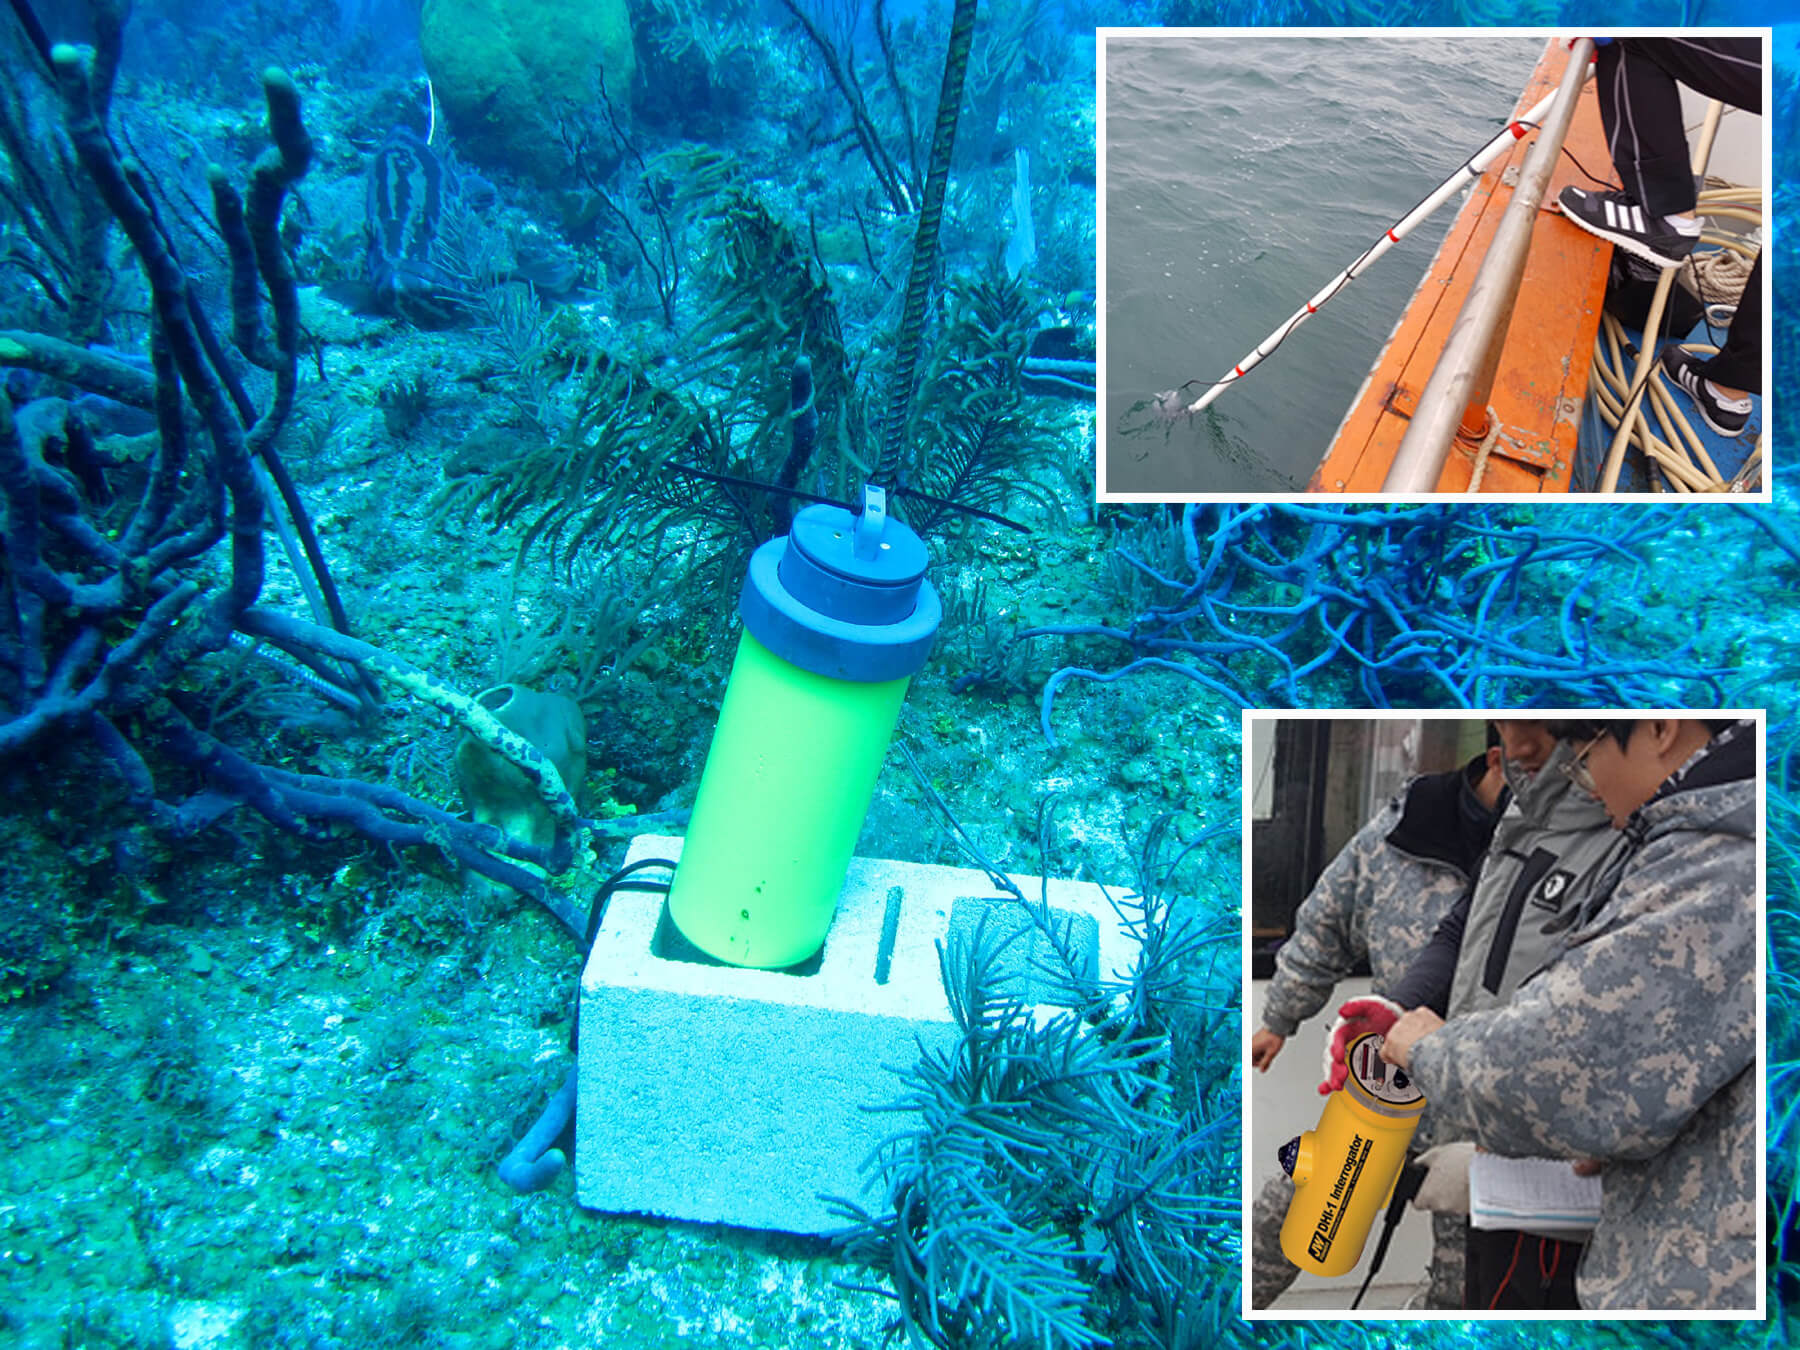 Scripps Institution of Oceanography's SFP-1 pinger deployed in Cayman Islands; Using the pinger receiver from the boat (bottom inset) with the remote hydrophone (top inset) to detect the pinger signal before sending a diver down